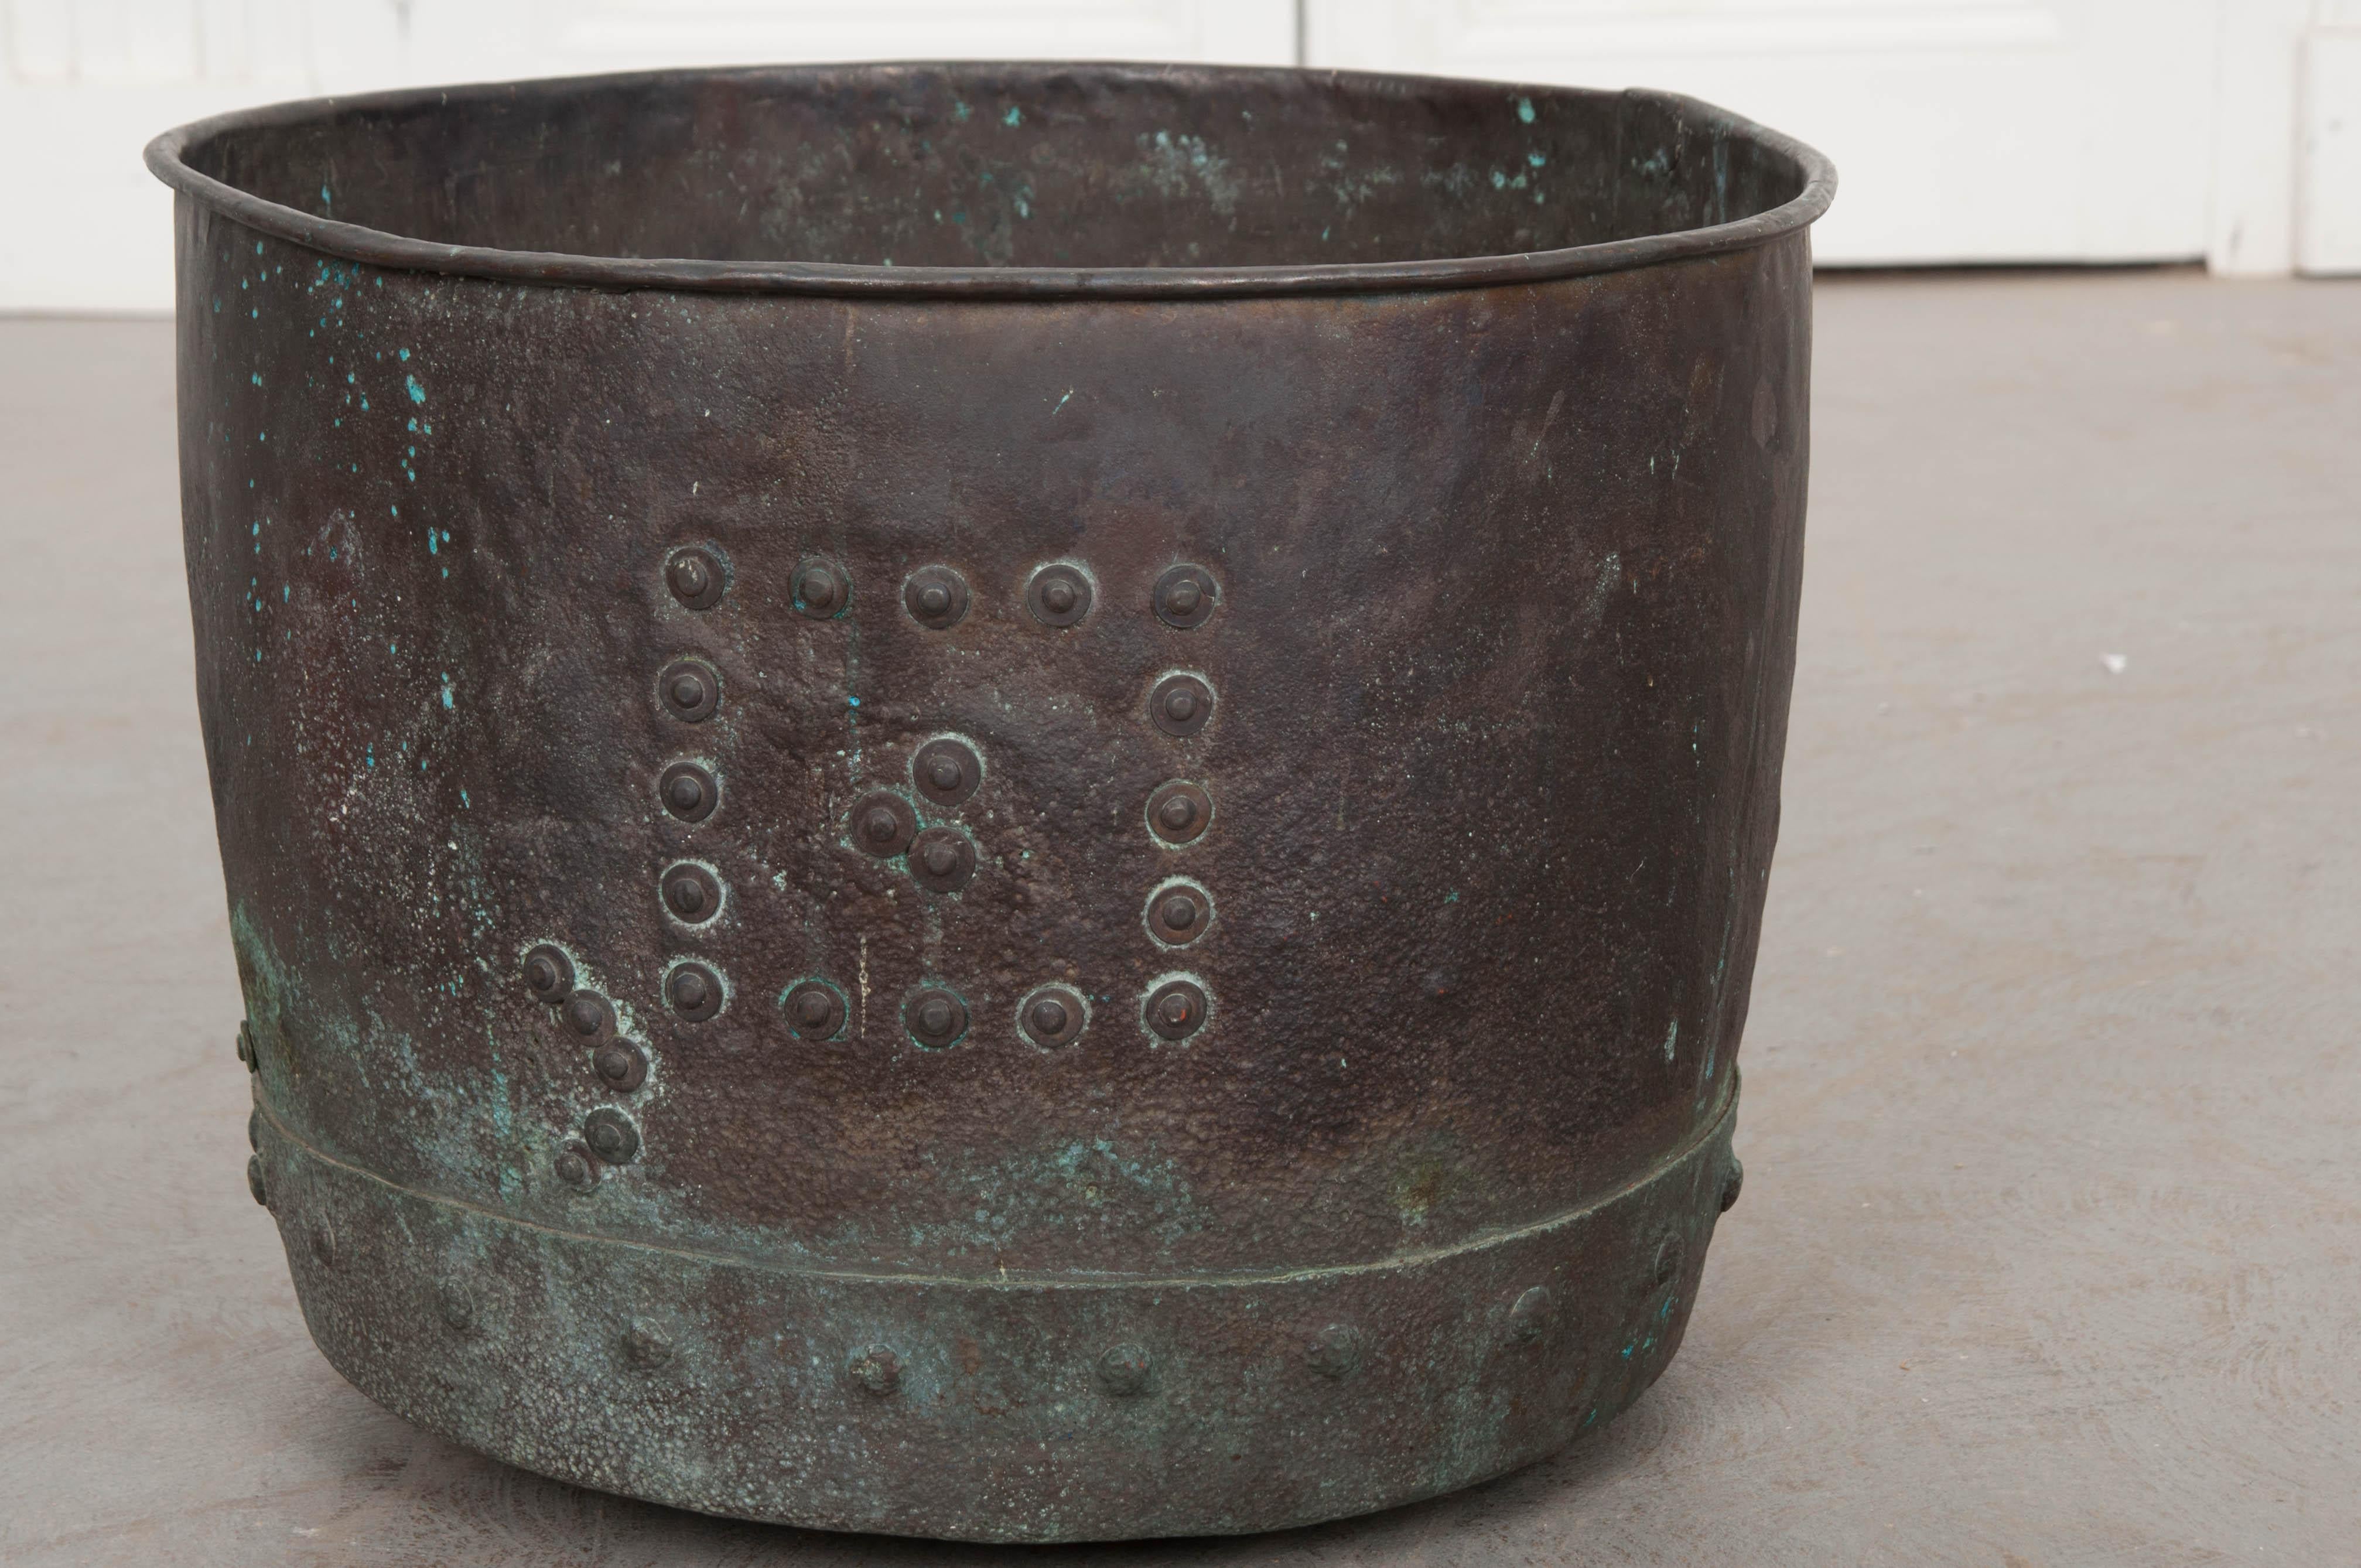 A beautifully patinated copper pot from England, circa 1880. The vessel has undergone some repairs at some points in its lifetime, as seen in the interesting patches secured with rivets. The metal has oxidized and turned a beautiful blue-green